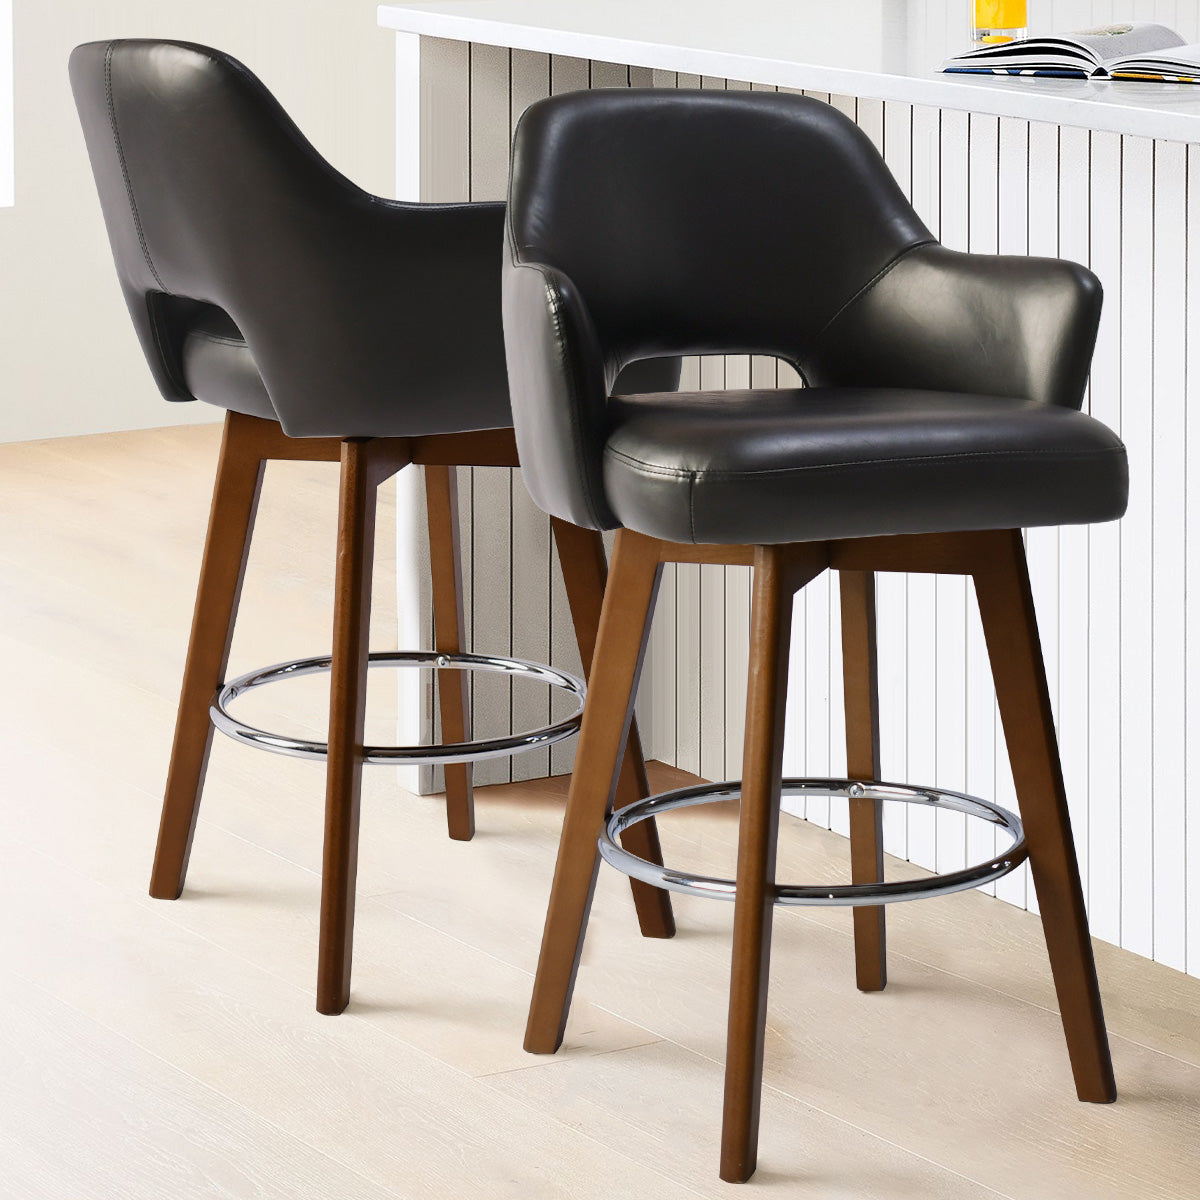 Edward 360° Swivel Bar Stool with Arms, Faux Leather Seat with Backrest, Stable Wooden Legs - The Pop Maison